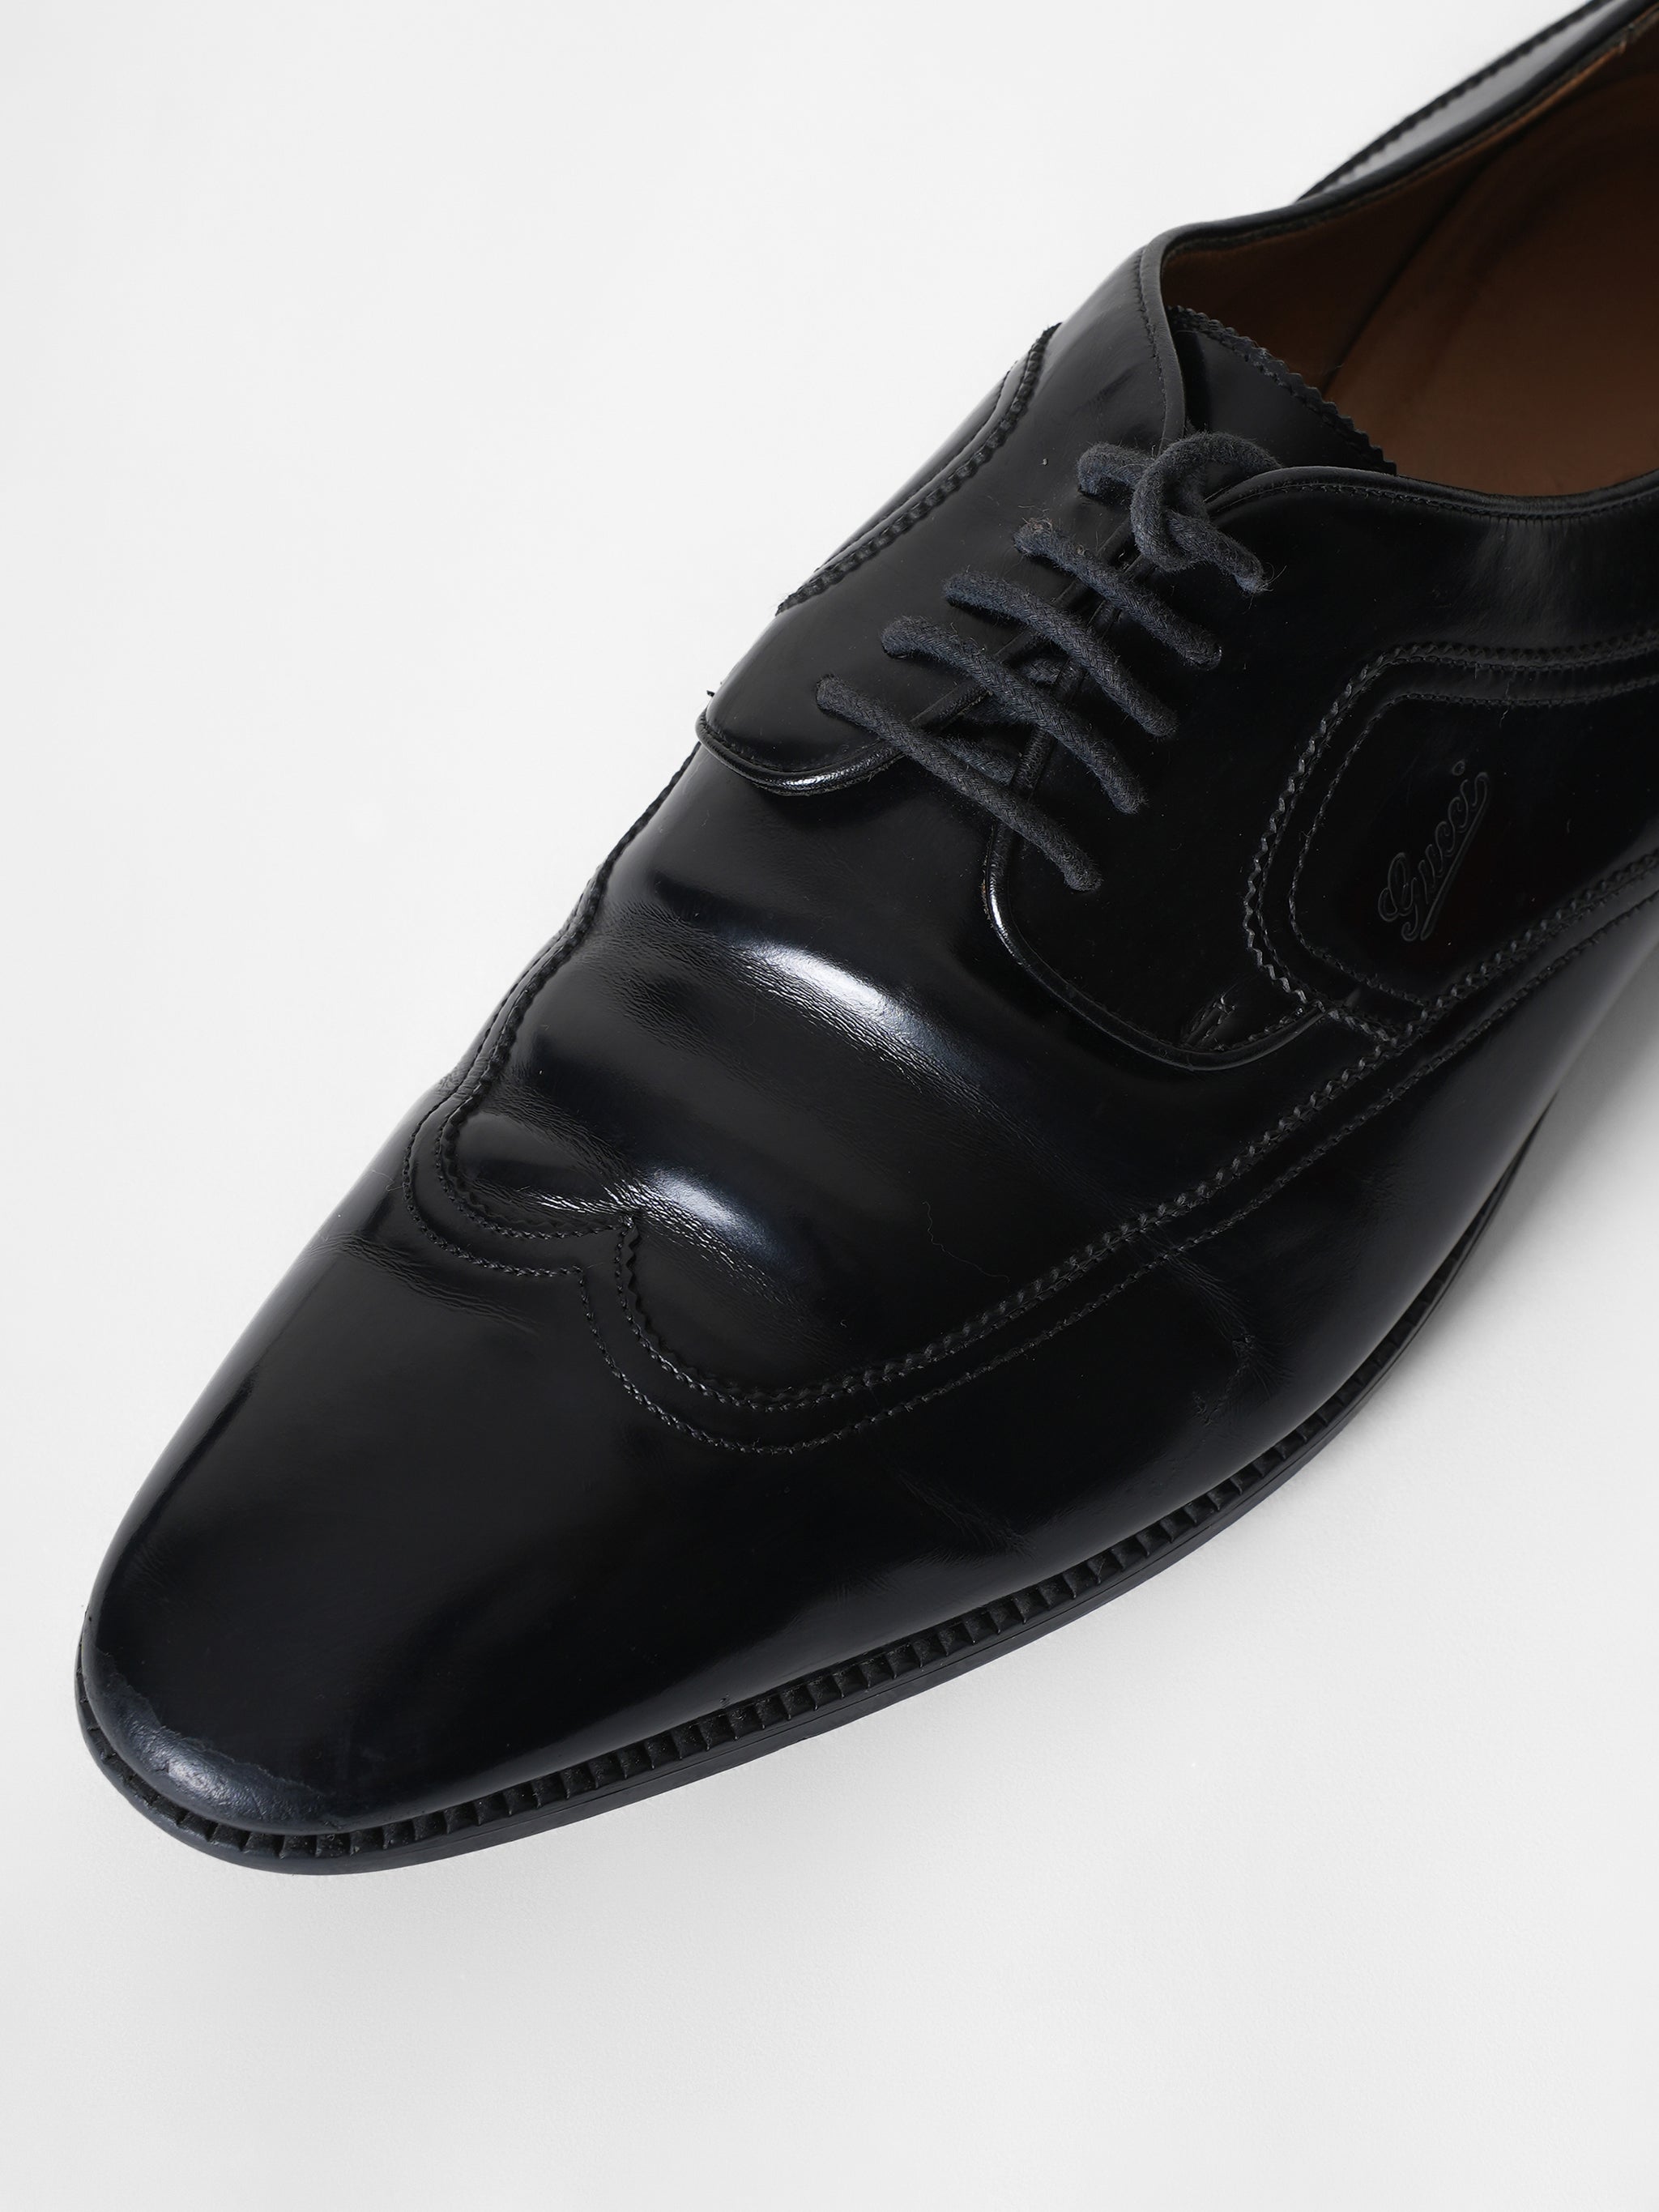 Gucci Black Tie-up Formal Shoes